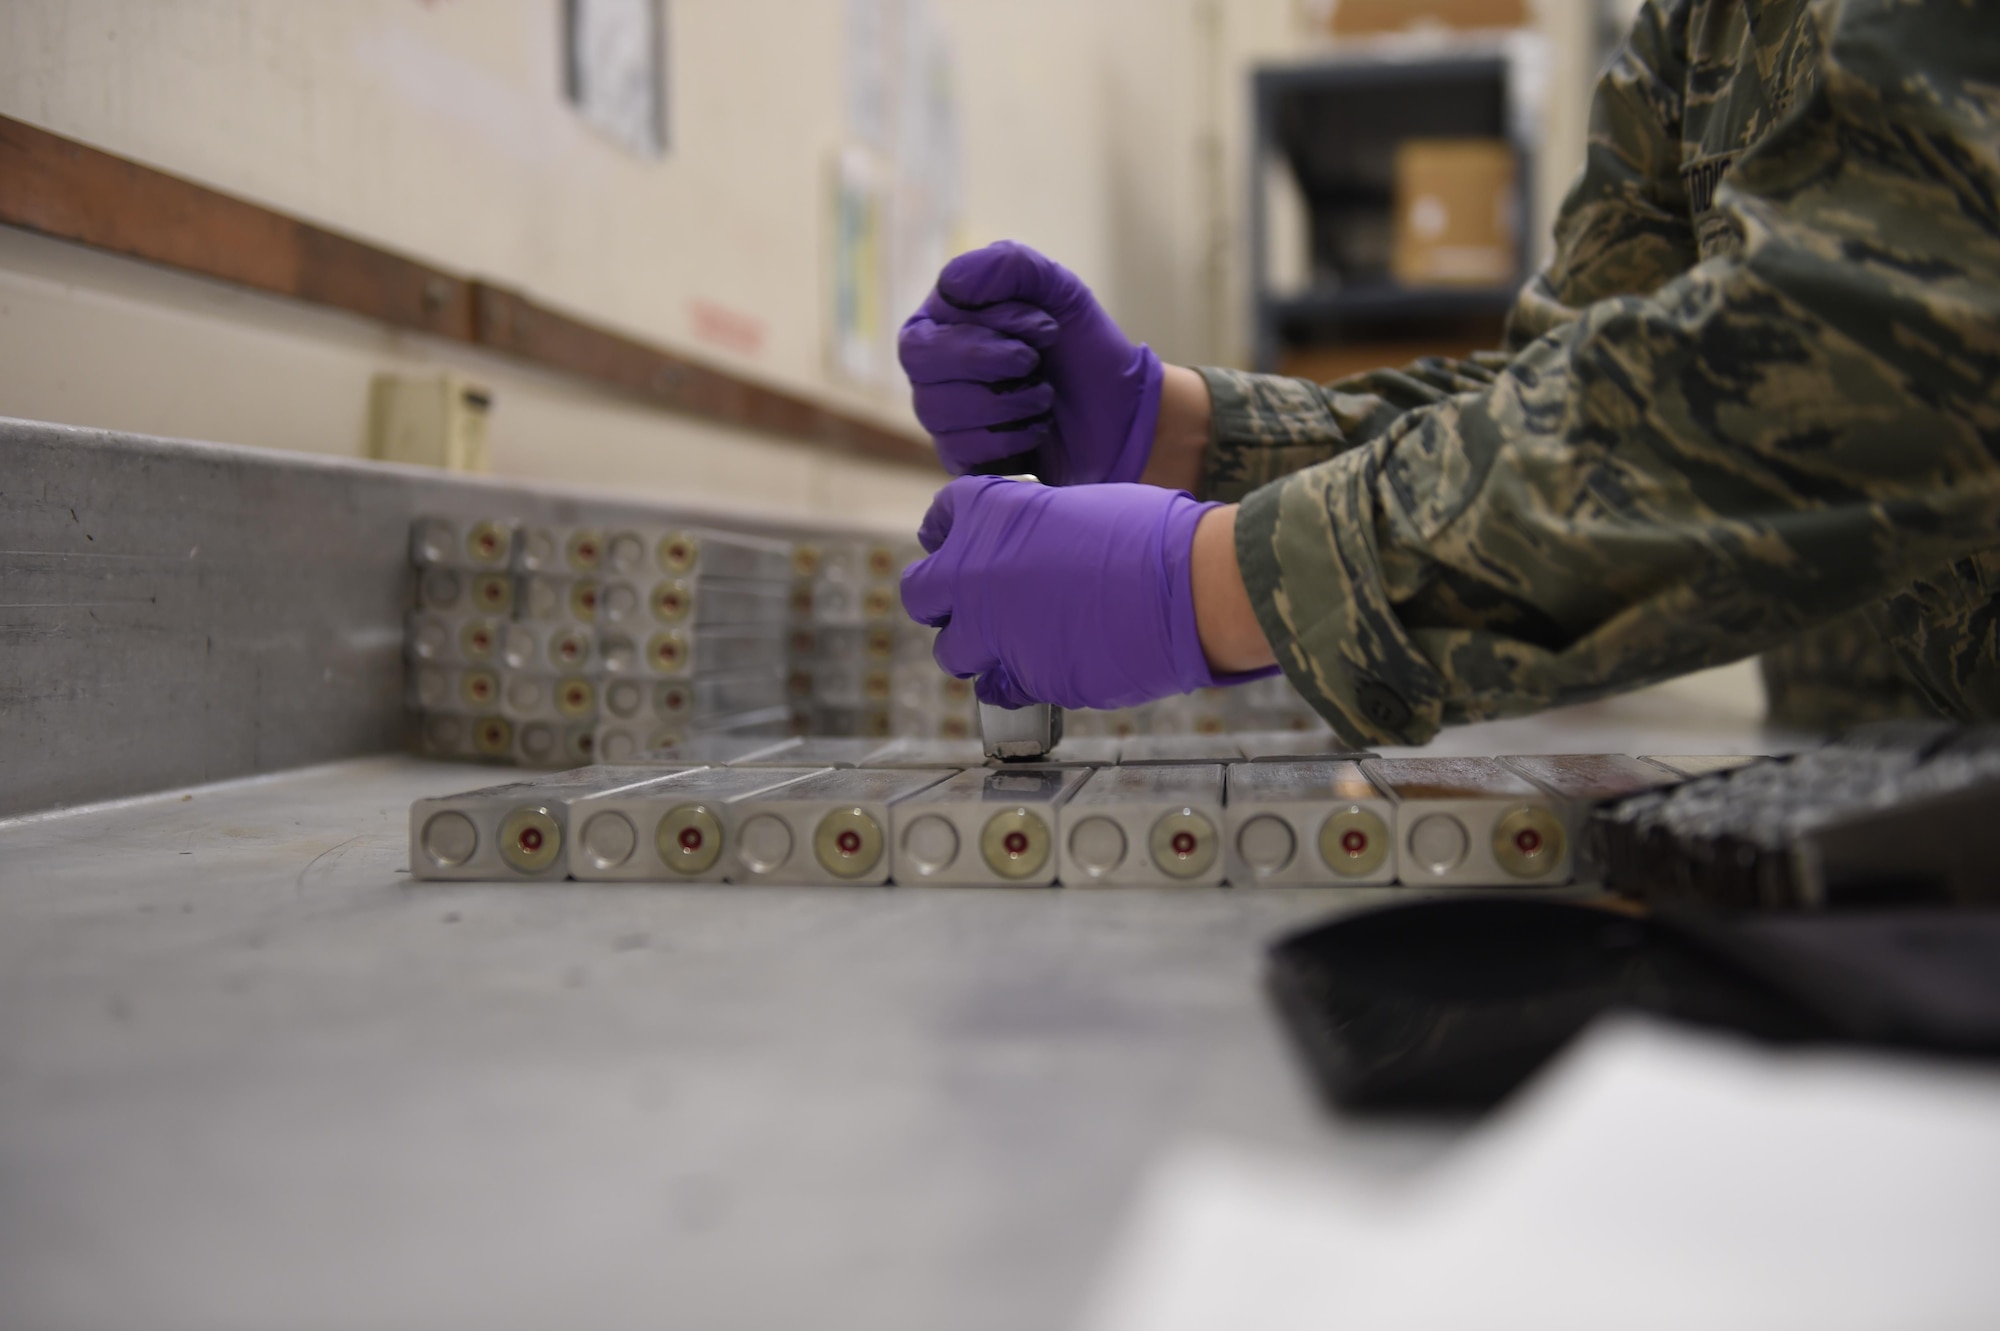 Staff Sgt. Chad Warner, 62nd Maintenance Squadron conventional maintenance production superintendent, unloads squibs or impulse cartridges, which provide a small propellant charge that ignite the flare stick, to build flares for the C-17 Globemaster III at Joint Base Lewis-McChord, Wash., March 14, 2017. A single C-17 flare system costs approximately $50,000 and are used as infrared countermeasures designed to defeat heat seeking surface-to-air missiles. (Air Force photo/ Staff Sgt. Naomi Shipley)